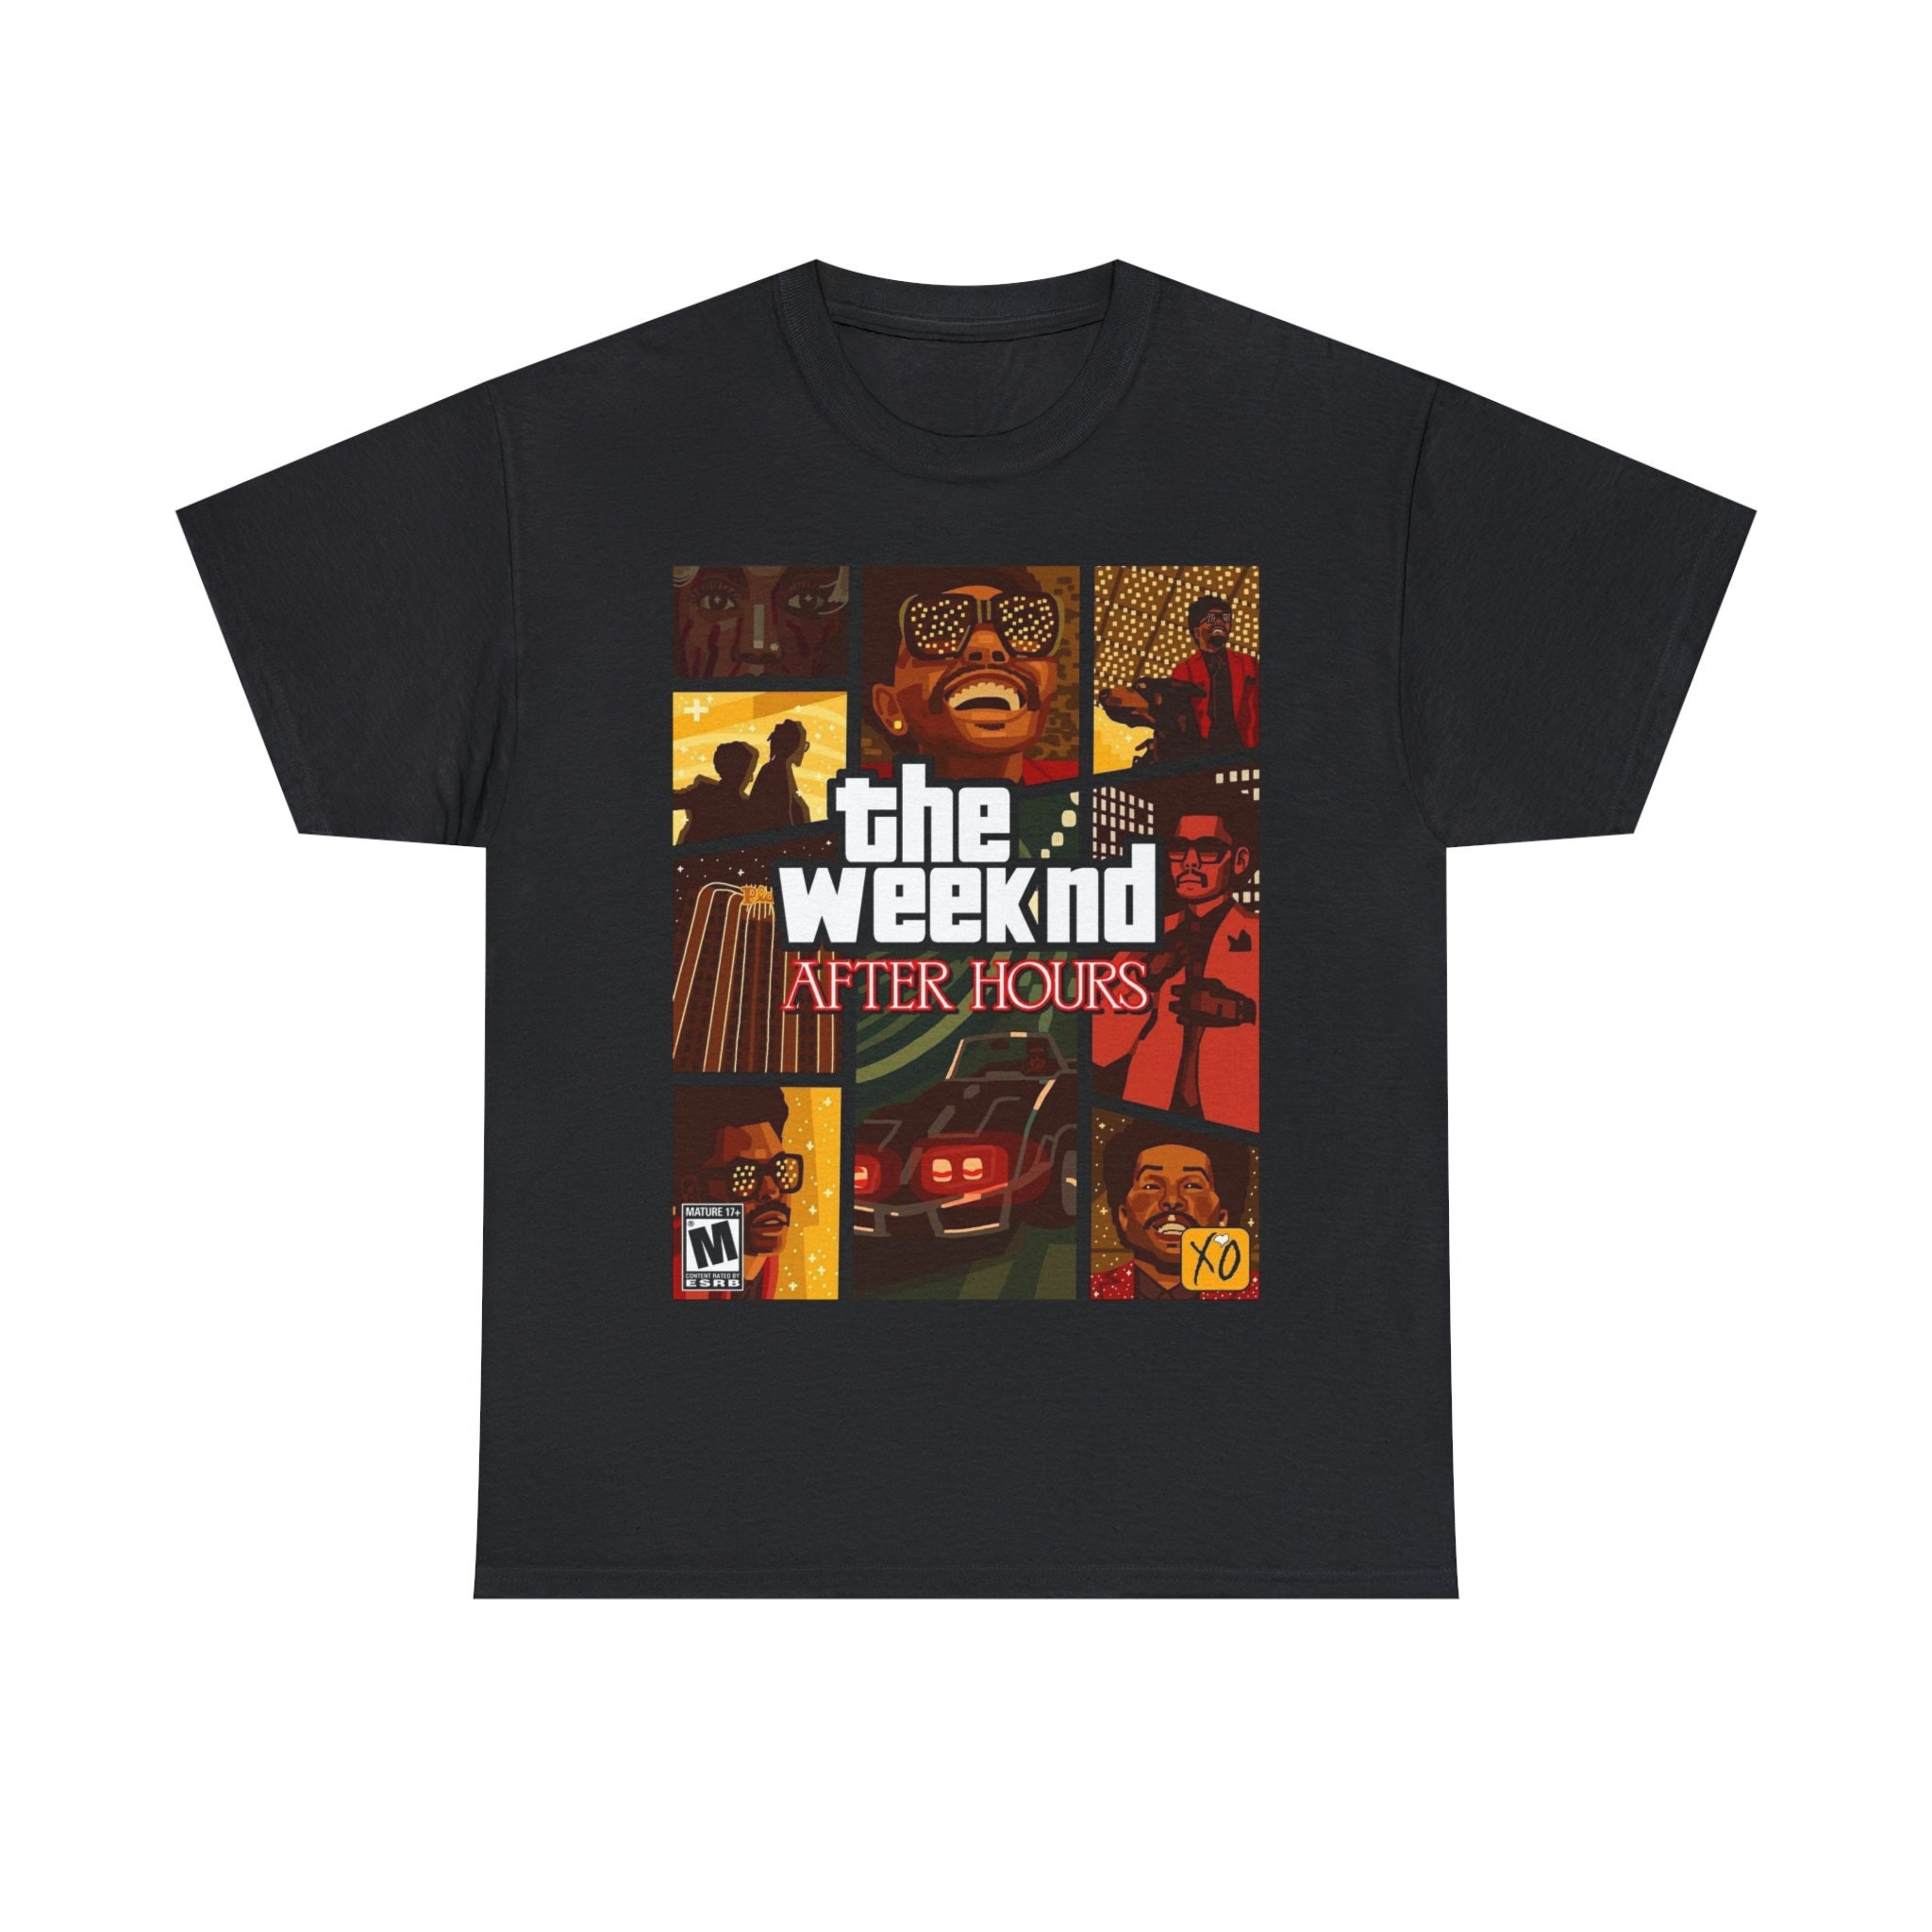 Buy The Weeknd Clothing Online In India -  India